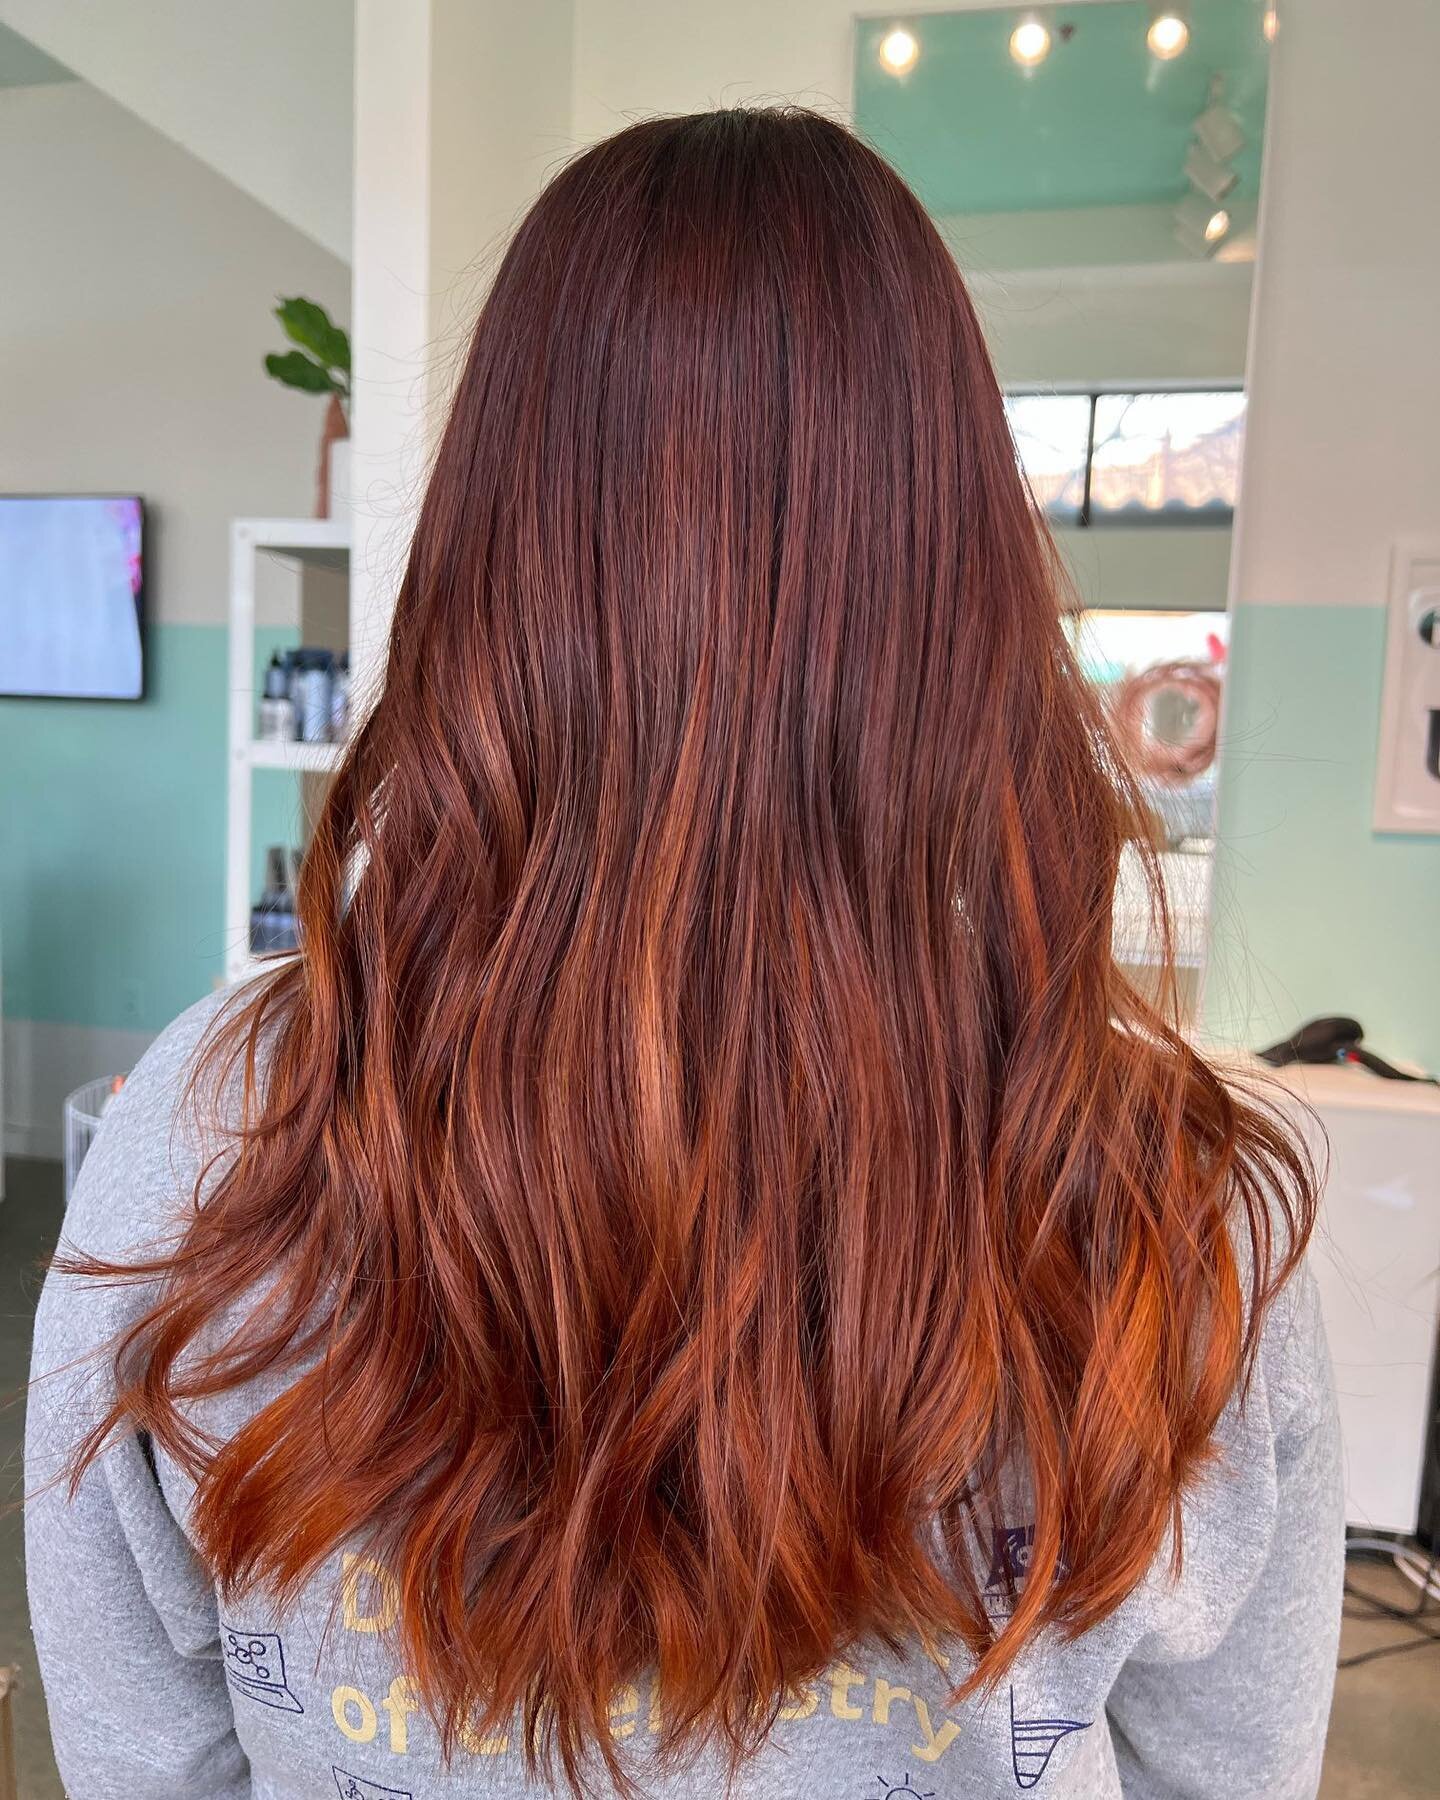 Investing in yourself always pays off ❤️ We&rsquo;re in love with these beautifully maintained hair extensions! 

Hair by Rhiannon

#fixsalonseattle #seattlehairstylist #seattlehairextensions #universityvillage #greenlake #seattlelifestyle